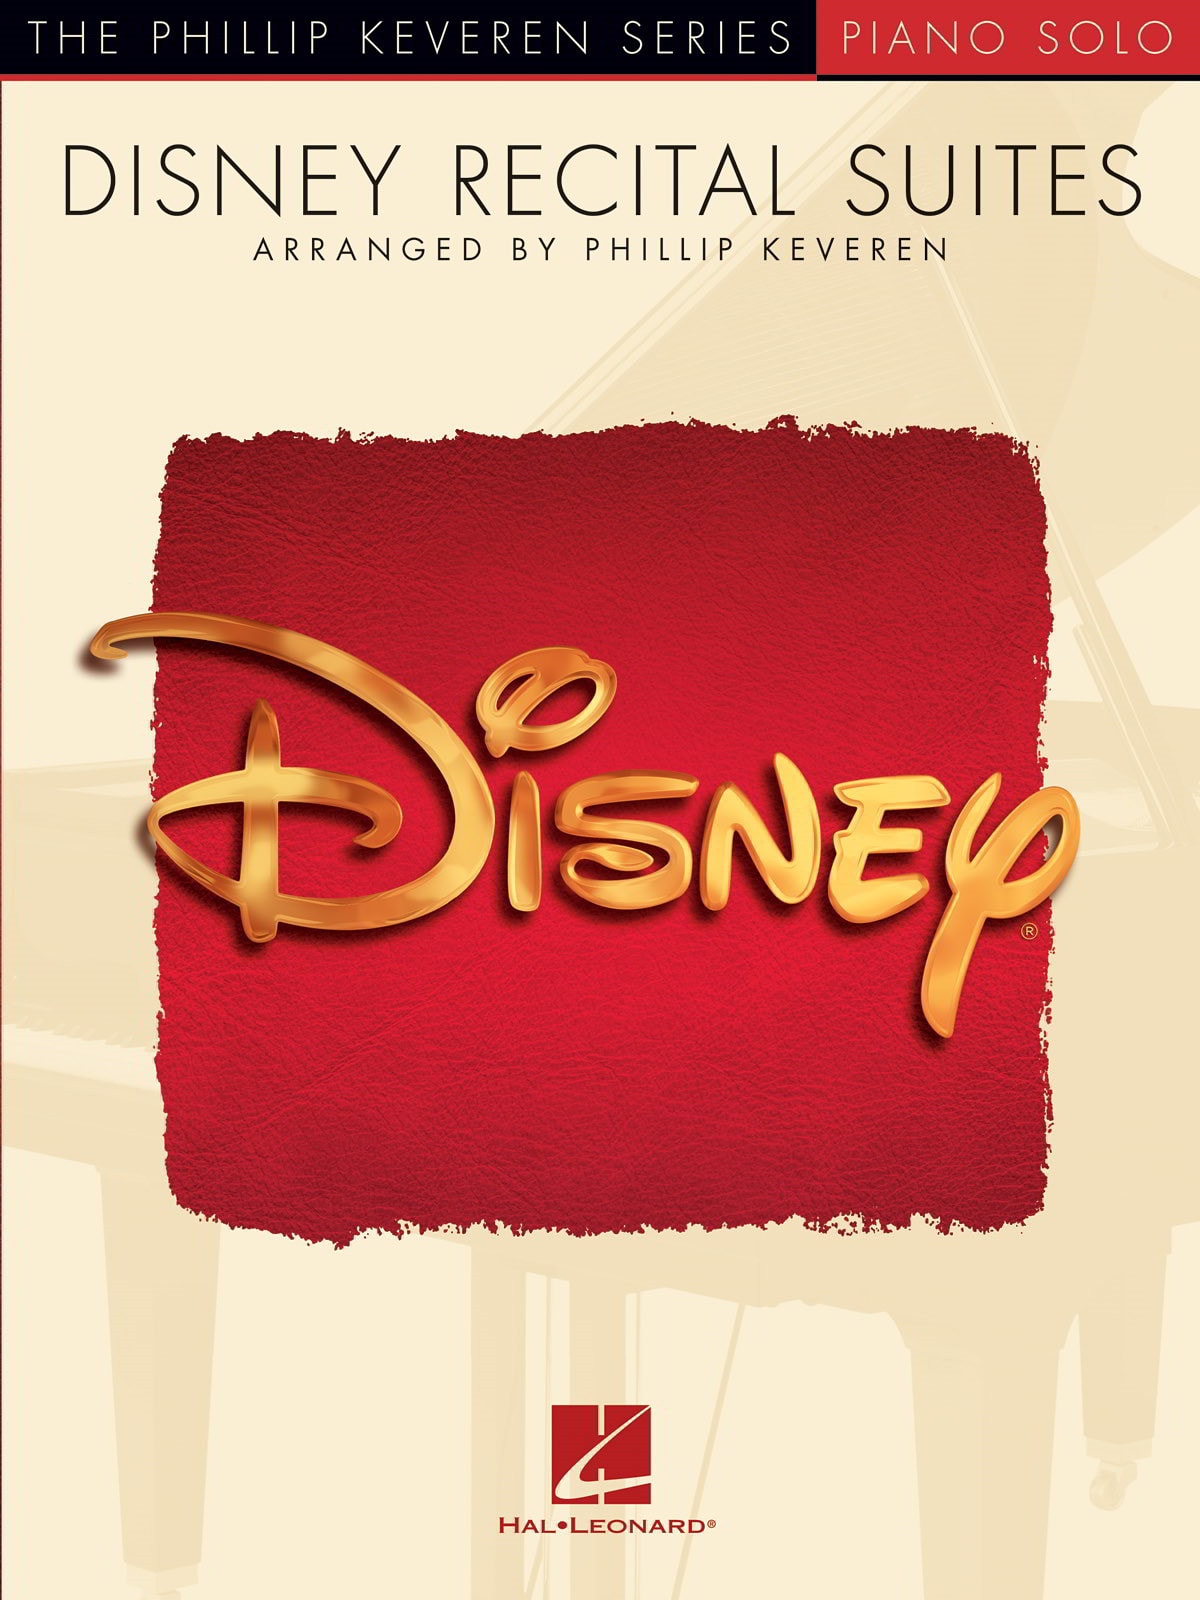 Disney Recital Suites for Piano Solo published by Hal Leonard